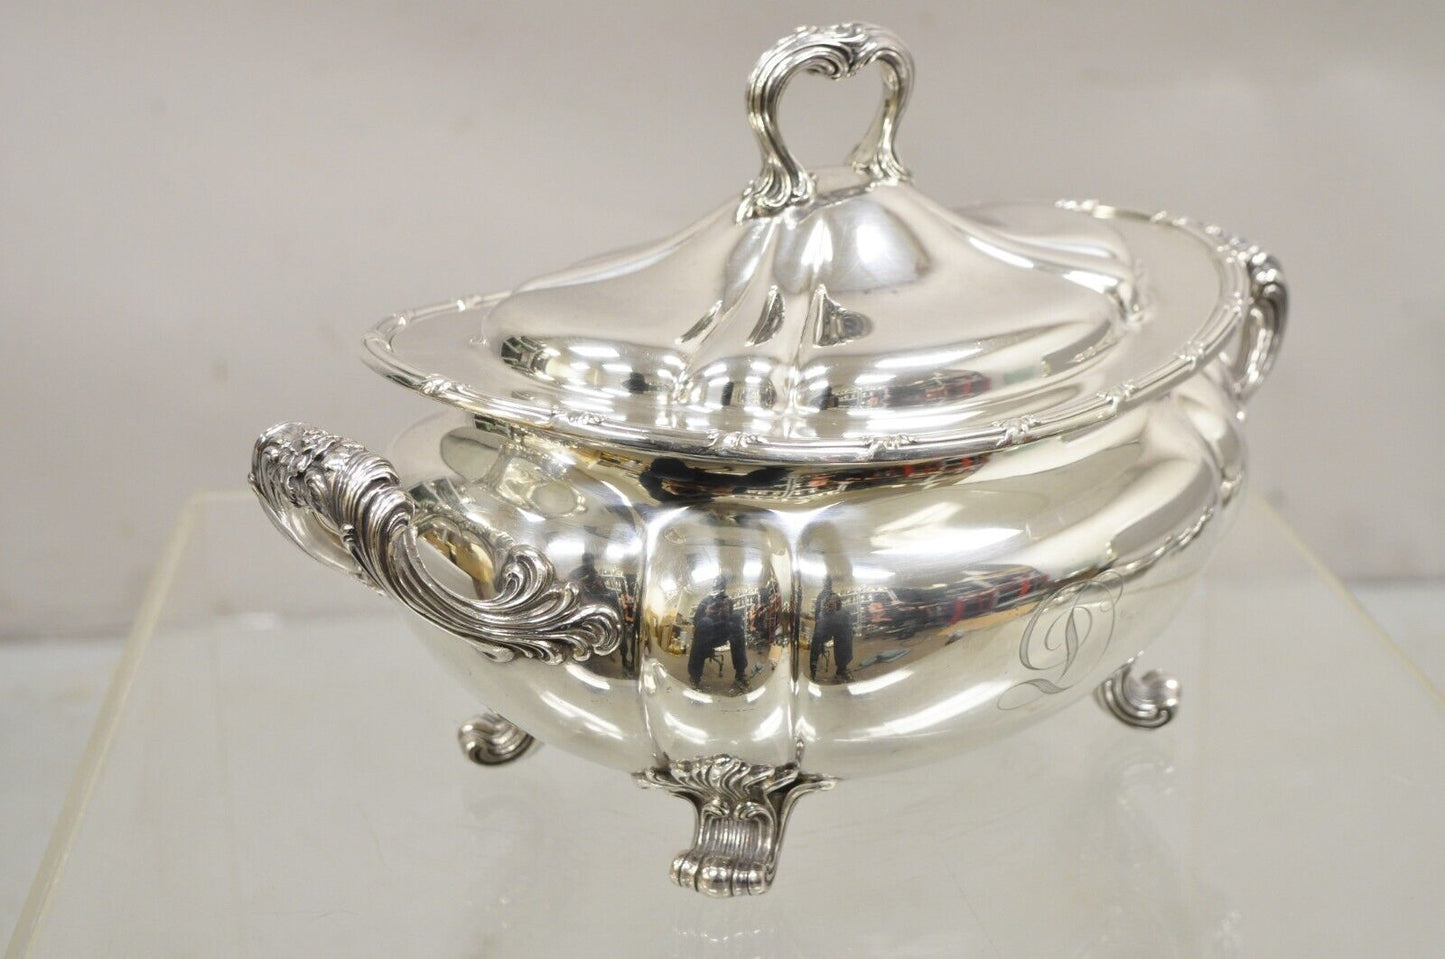 Antique Gorham 01121 1904 6 Pints Victorian Silver Plated Lidded Soup Tureen